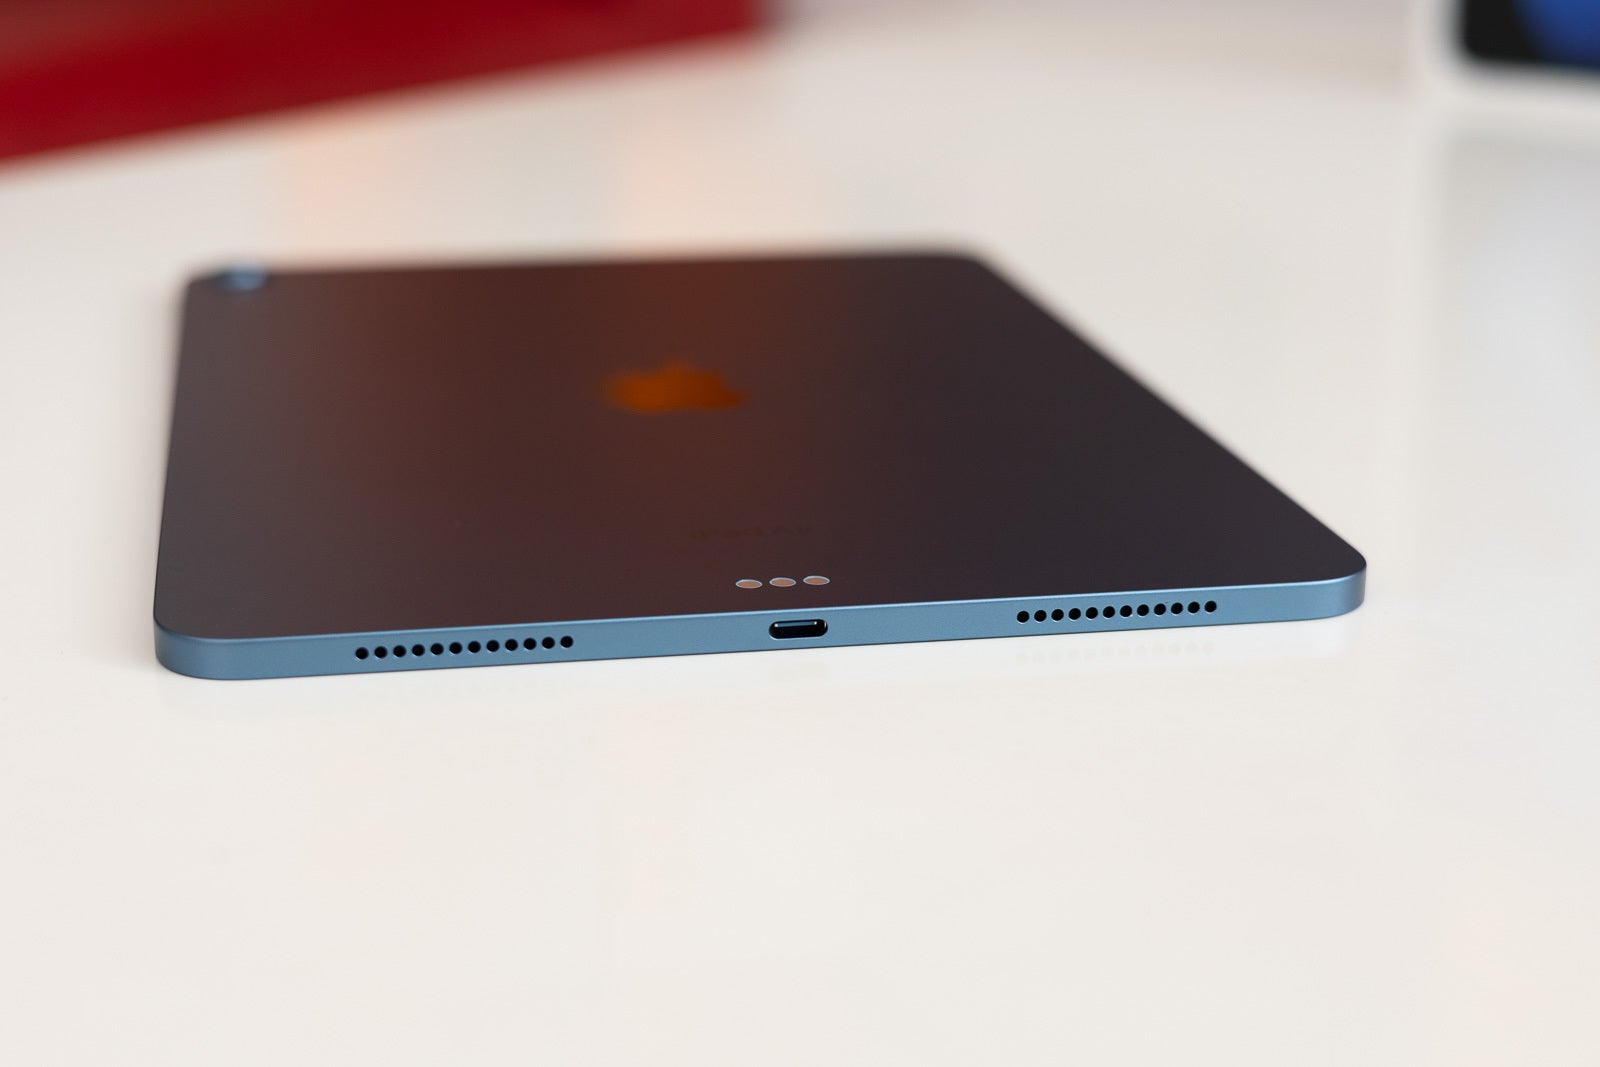 The speaker grills of an iPad Air 2022 - Why Apple's upcoming budget 2022 iPad is a massive threat to Android tablets (and their already smaller market share)